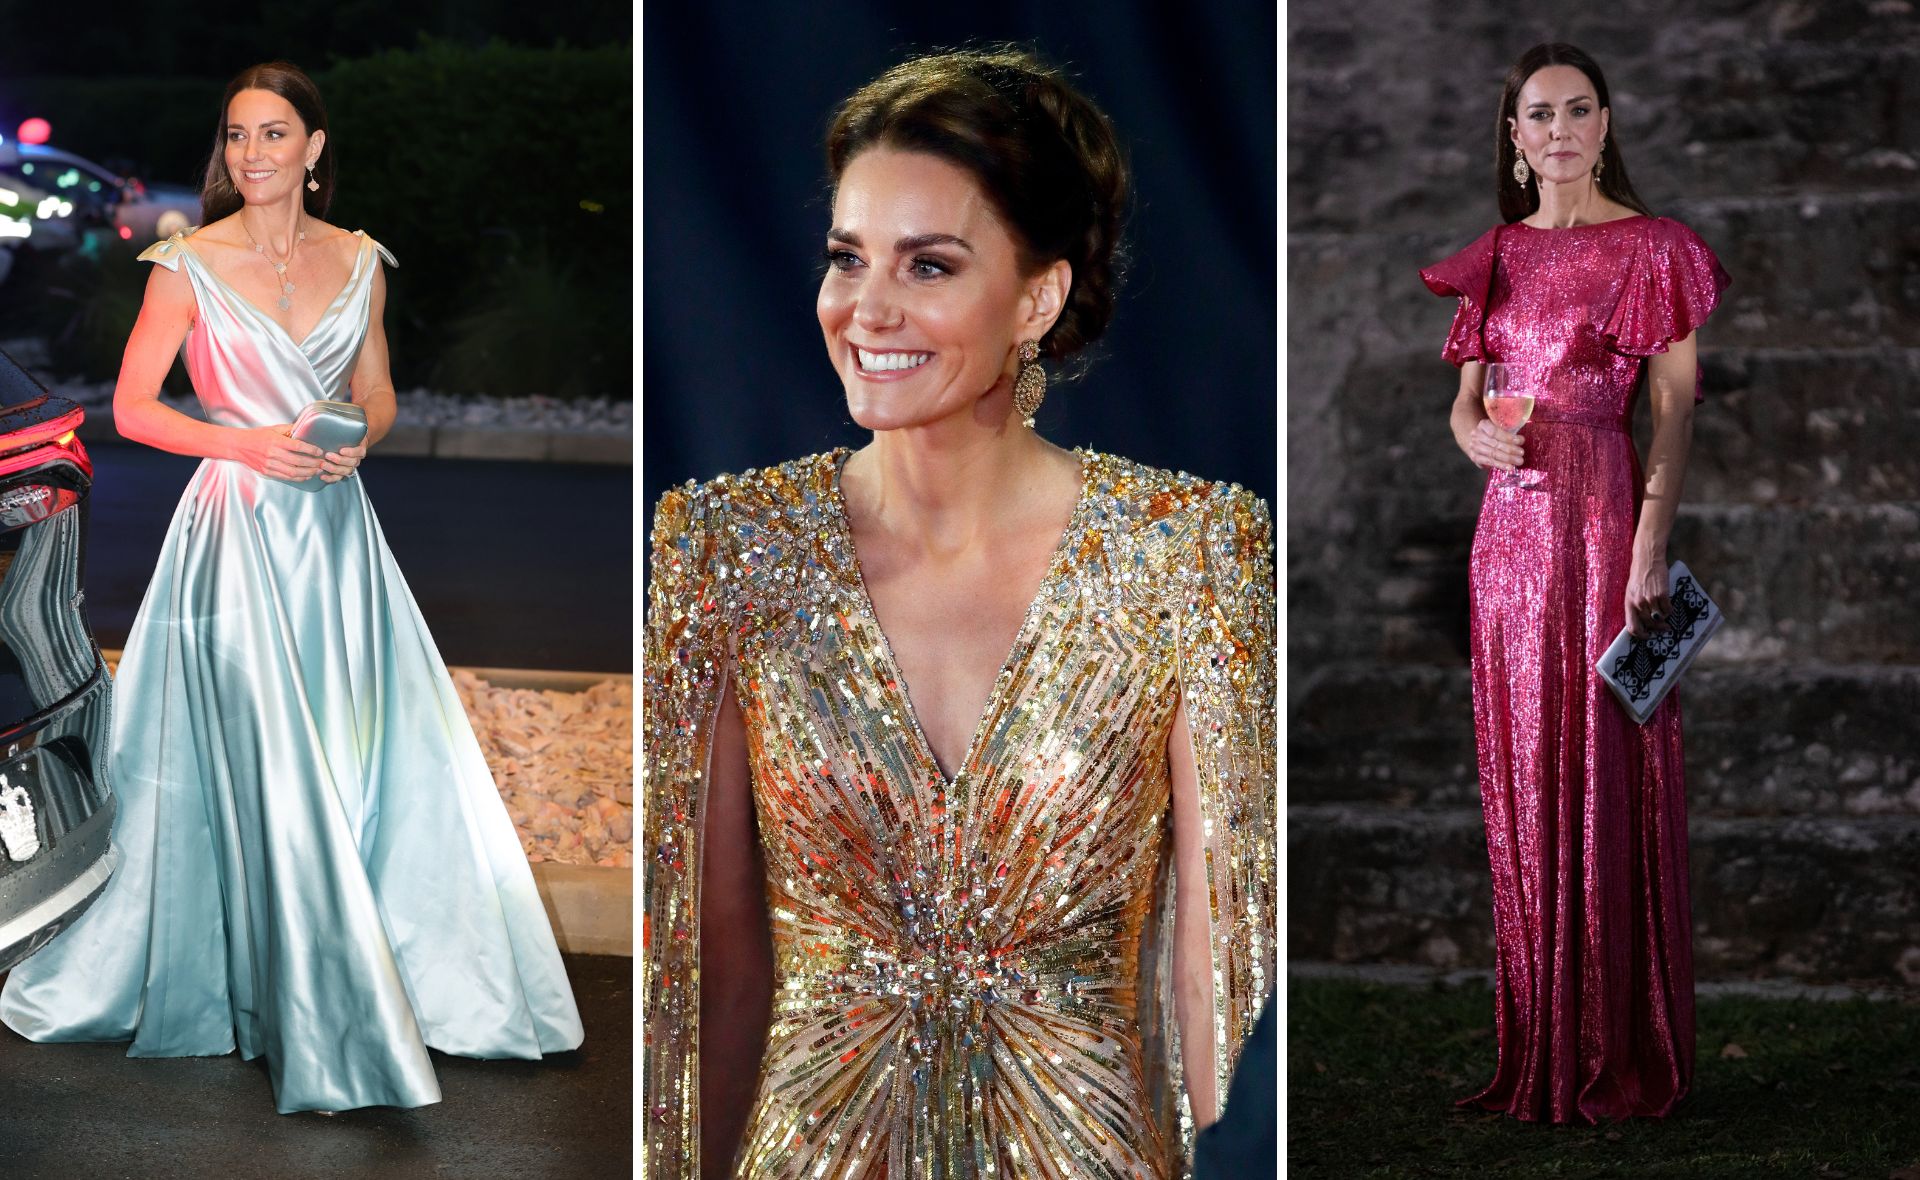 Fit for a princess: Catherine, Princess of Wales’ best evening gowns of all time